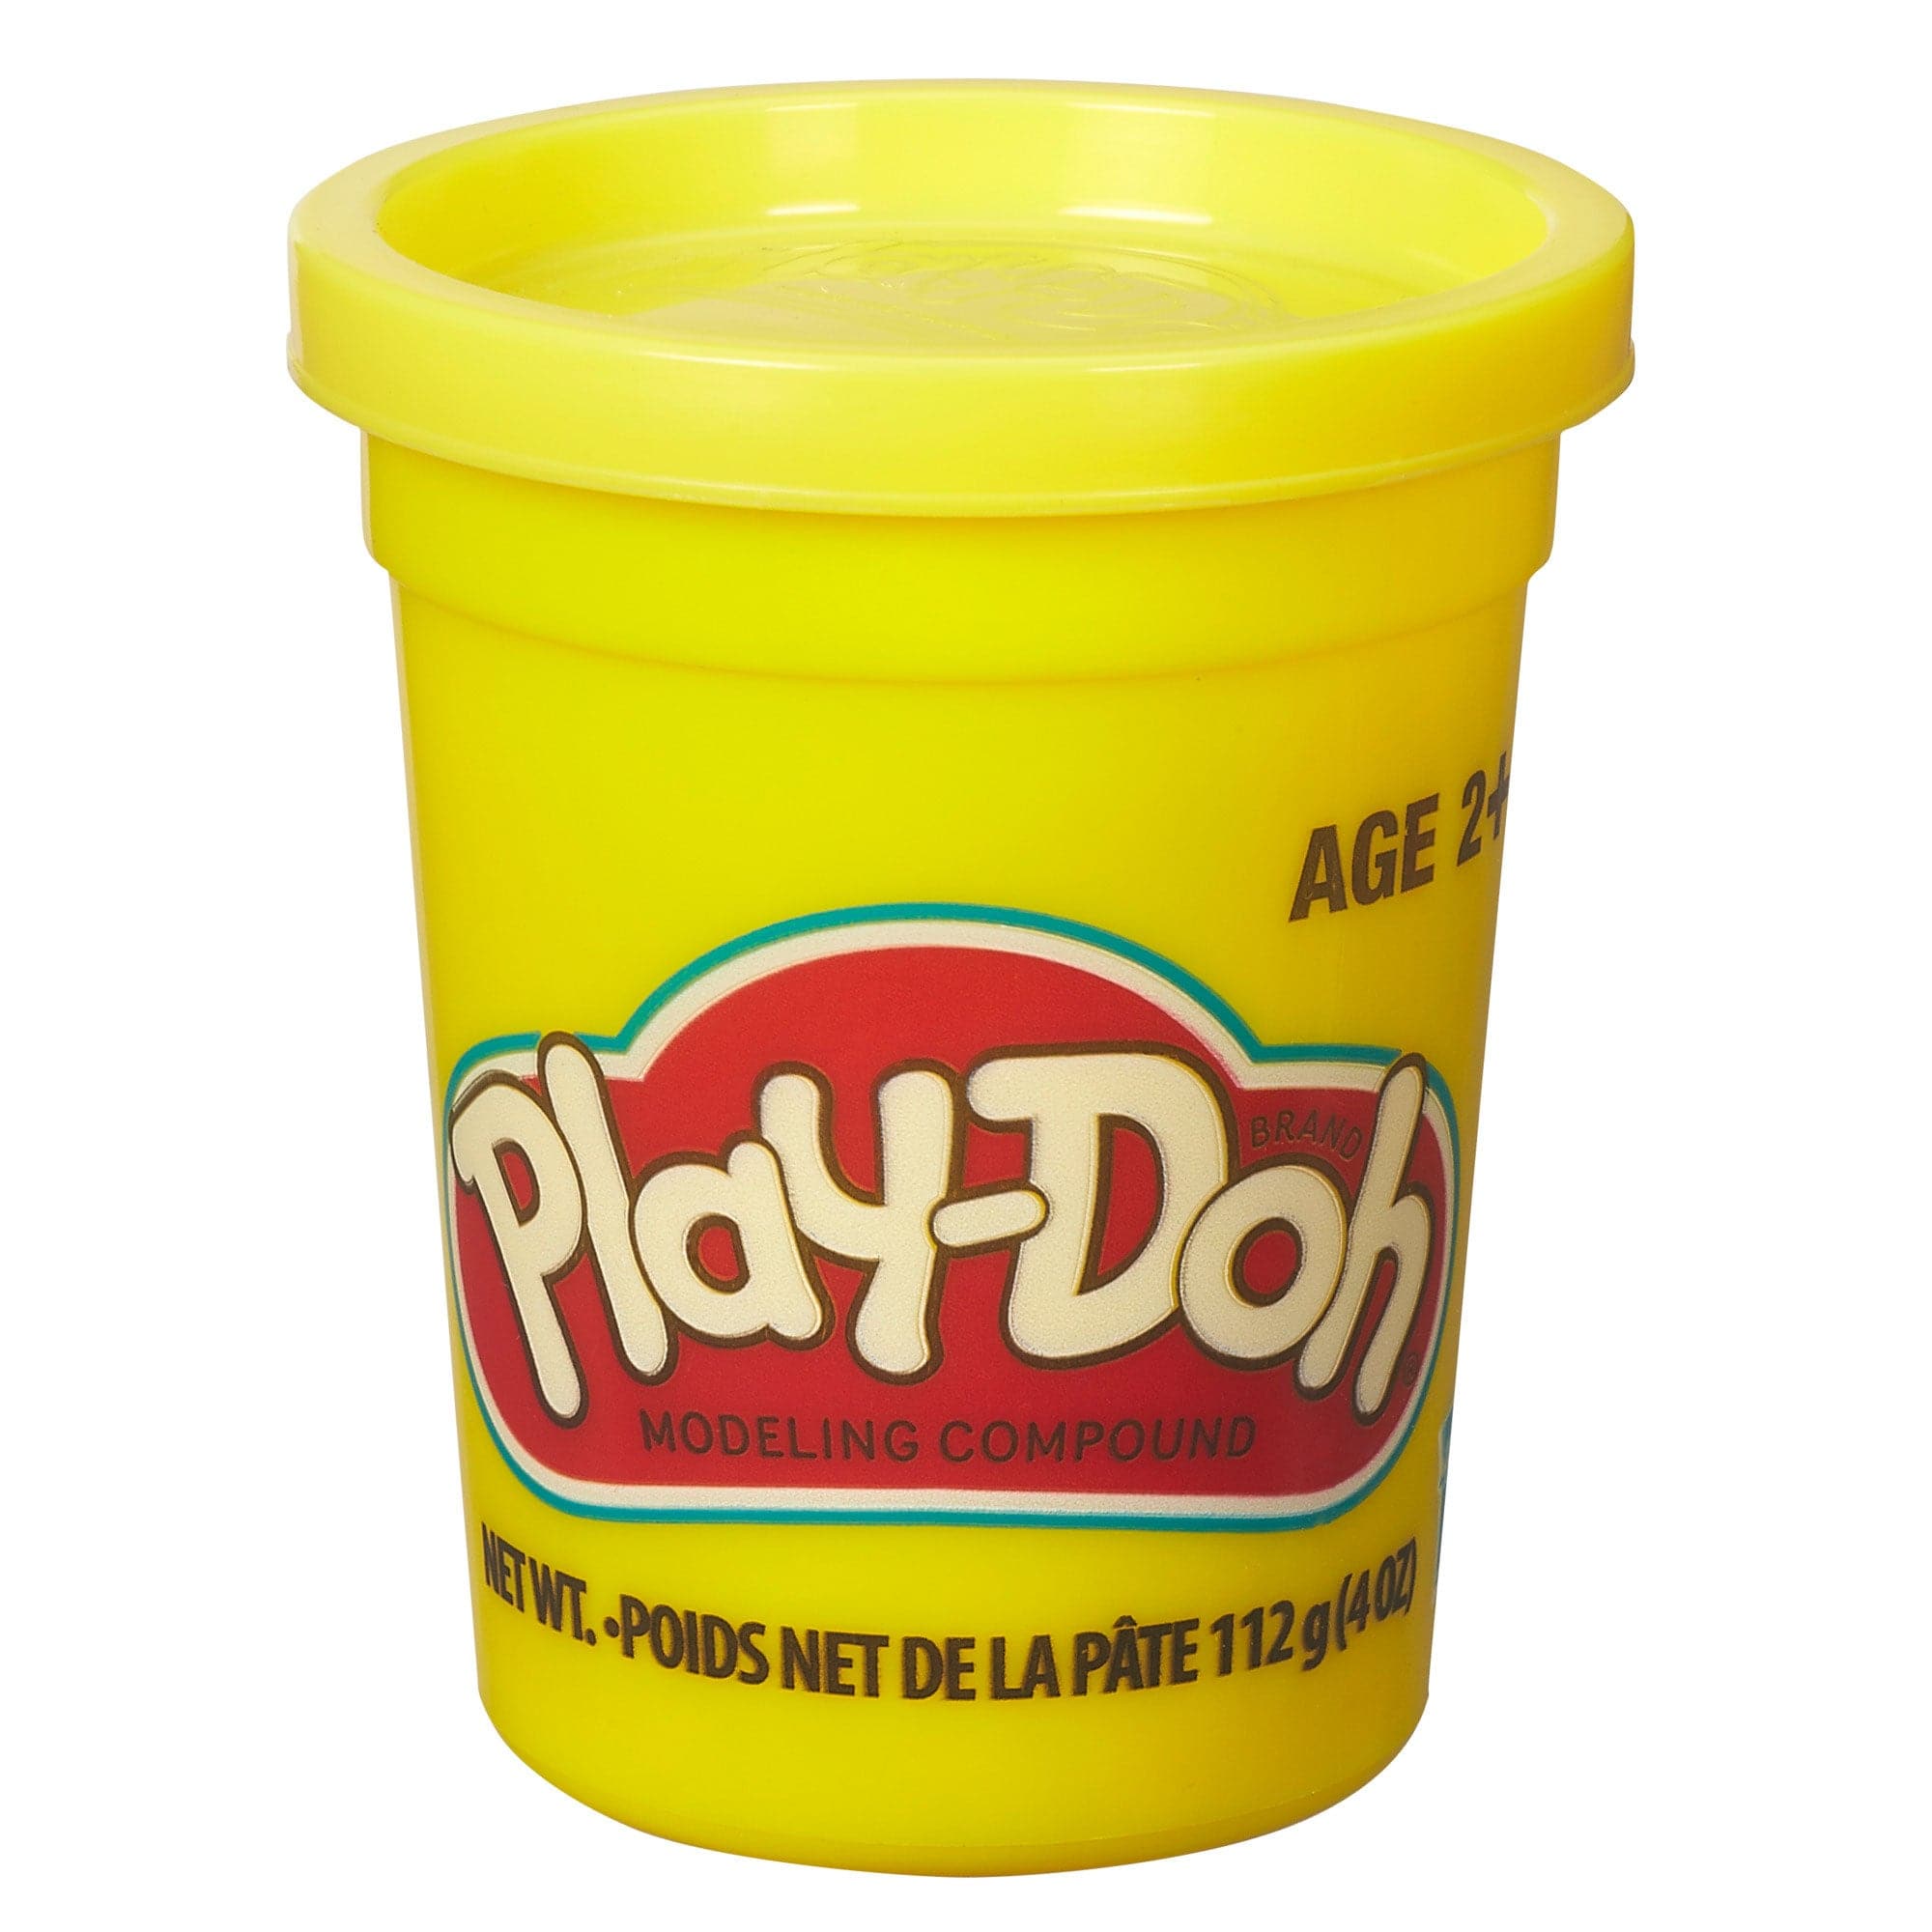 Hasbro-Play-Doh: Single Can Assorted 4oz-B6756Y-Yellow-Legacy Toys